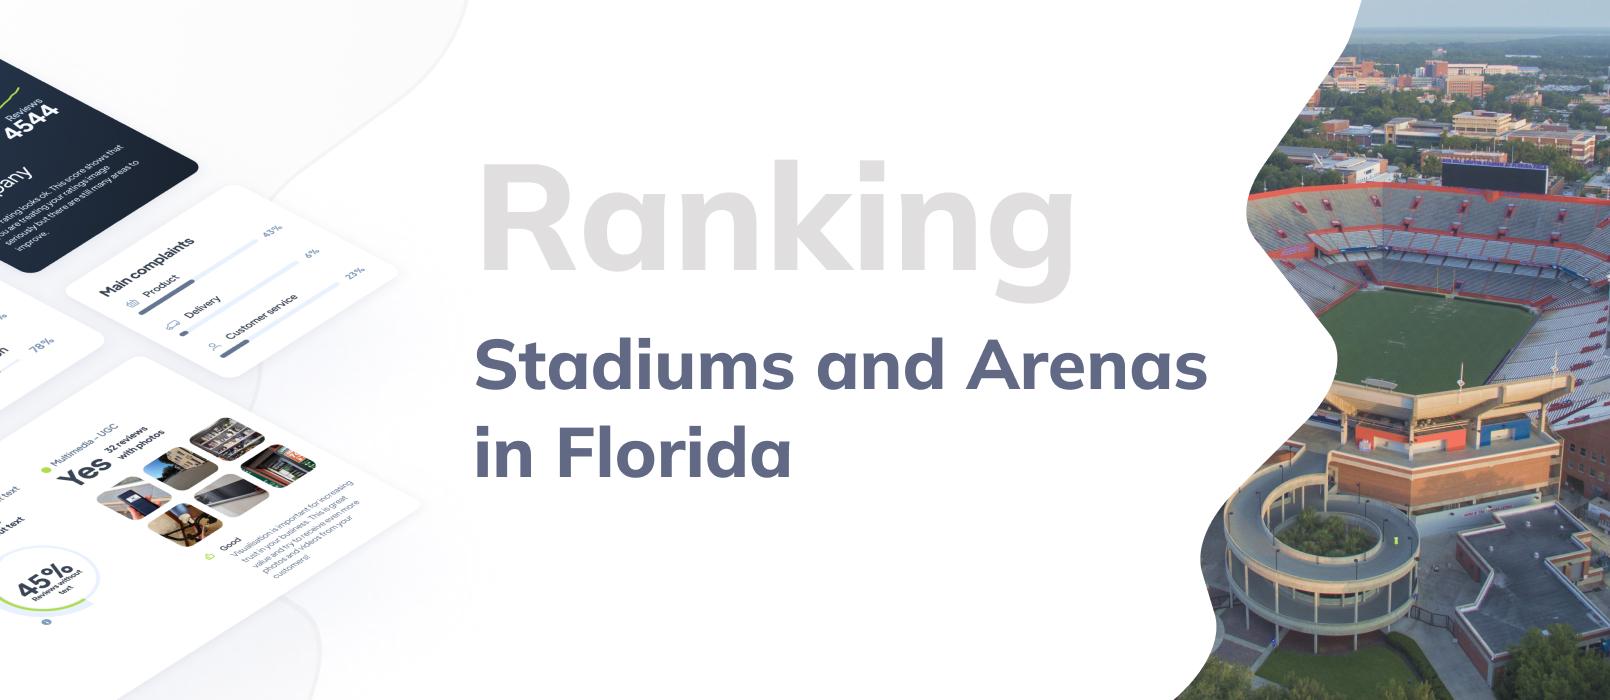 Best Stadiums and Arenas in Florida – TOP 10 ranking